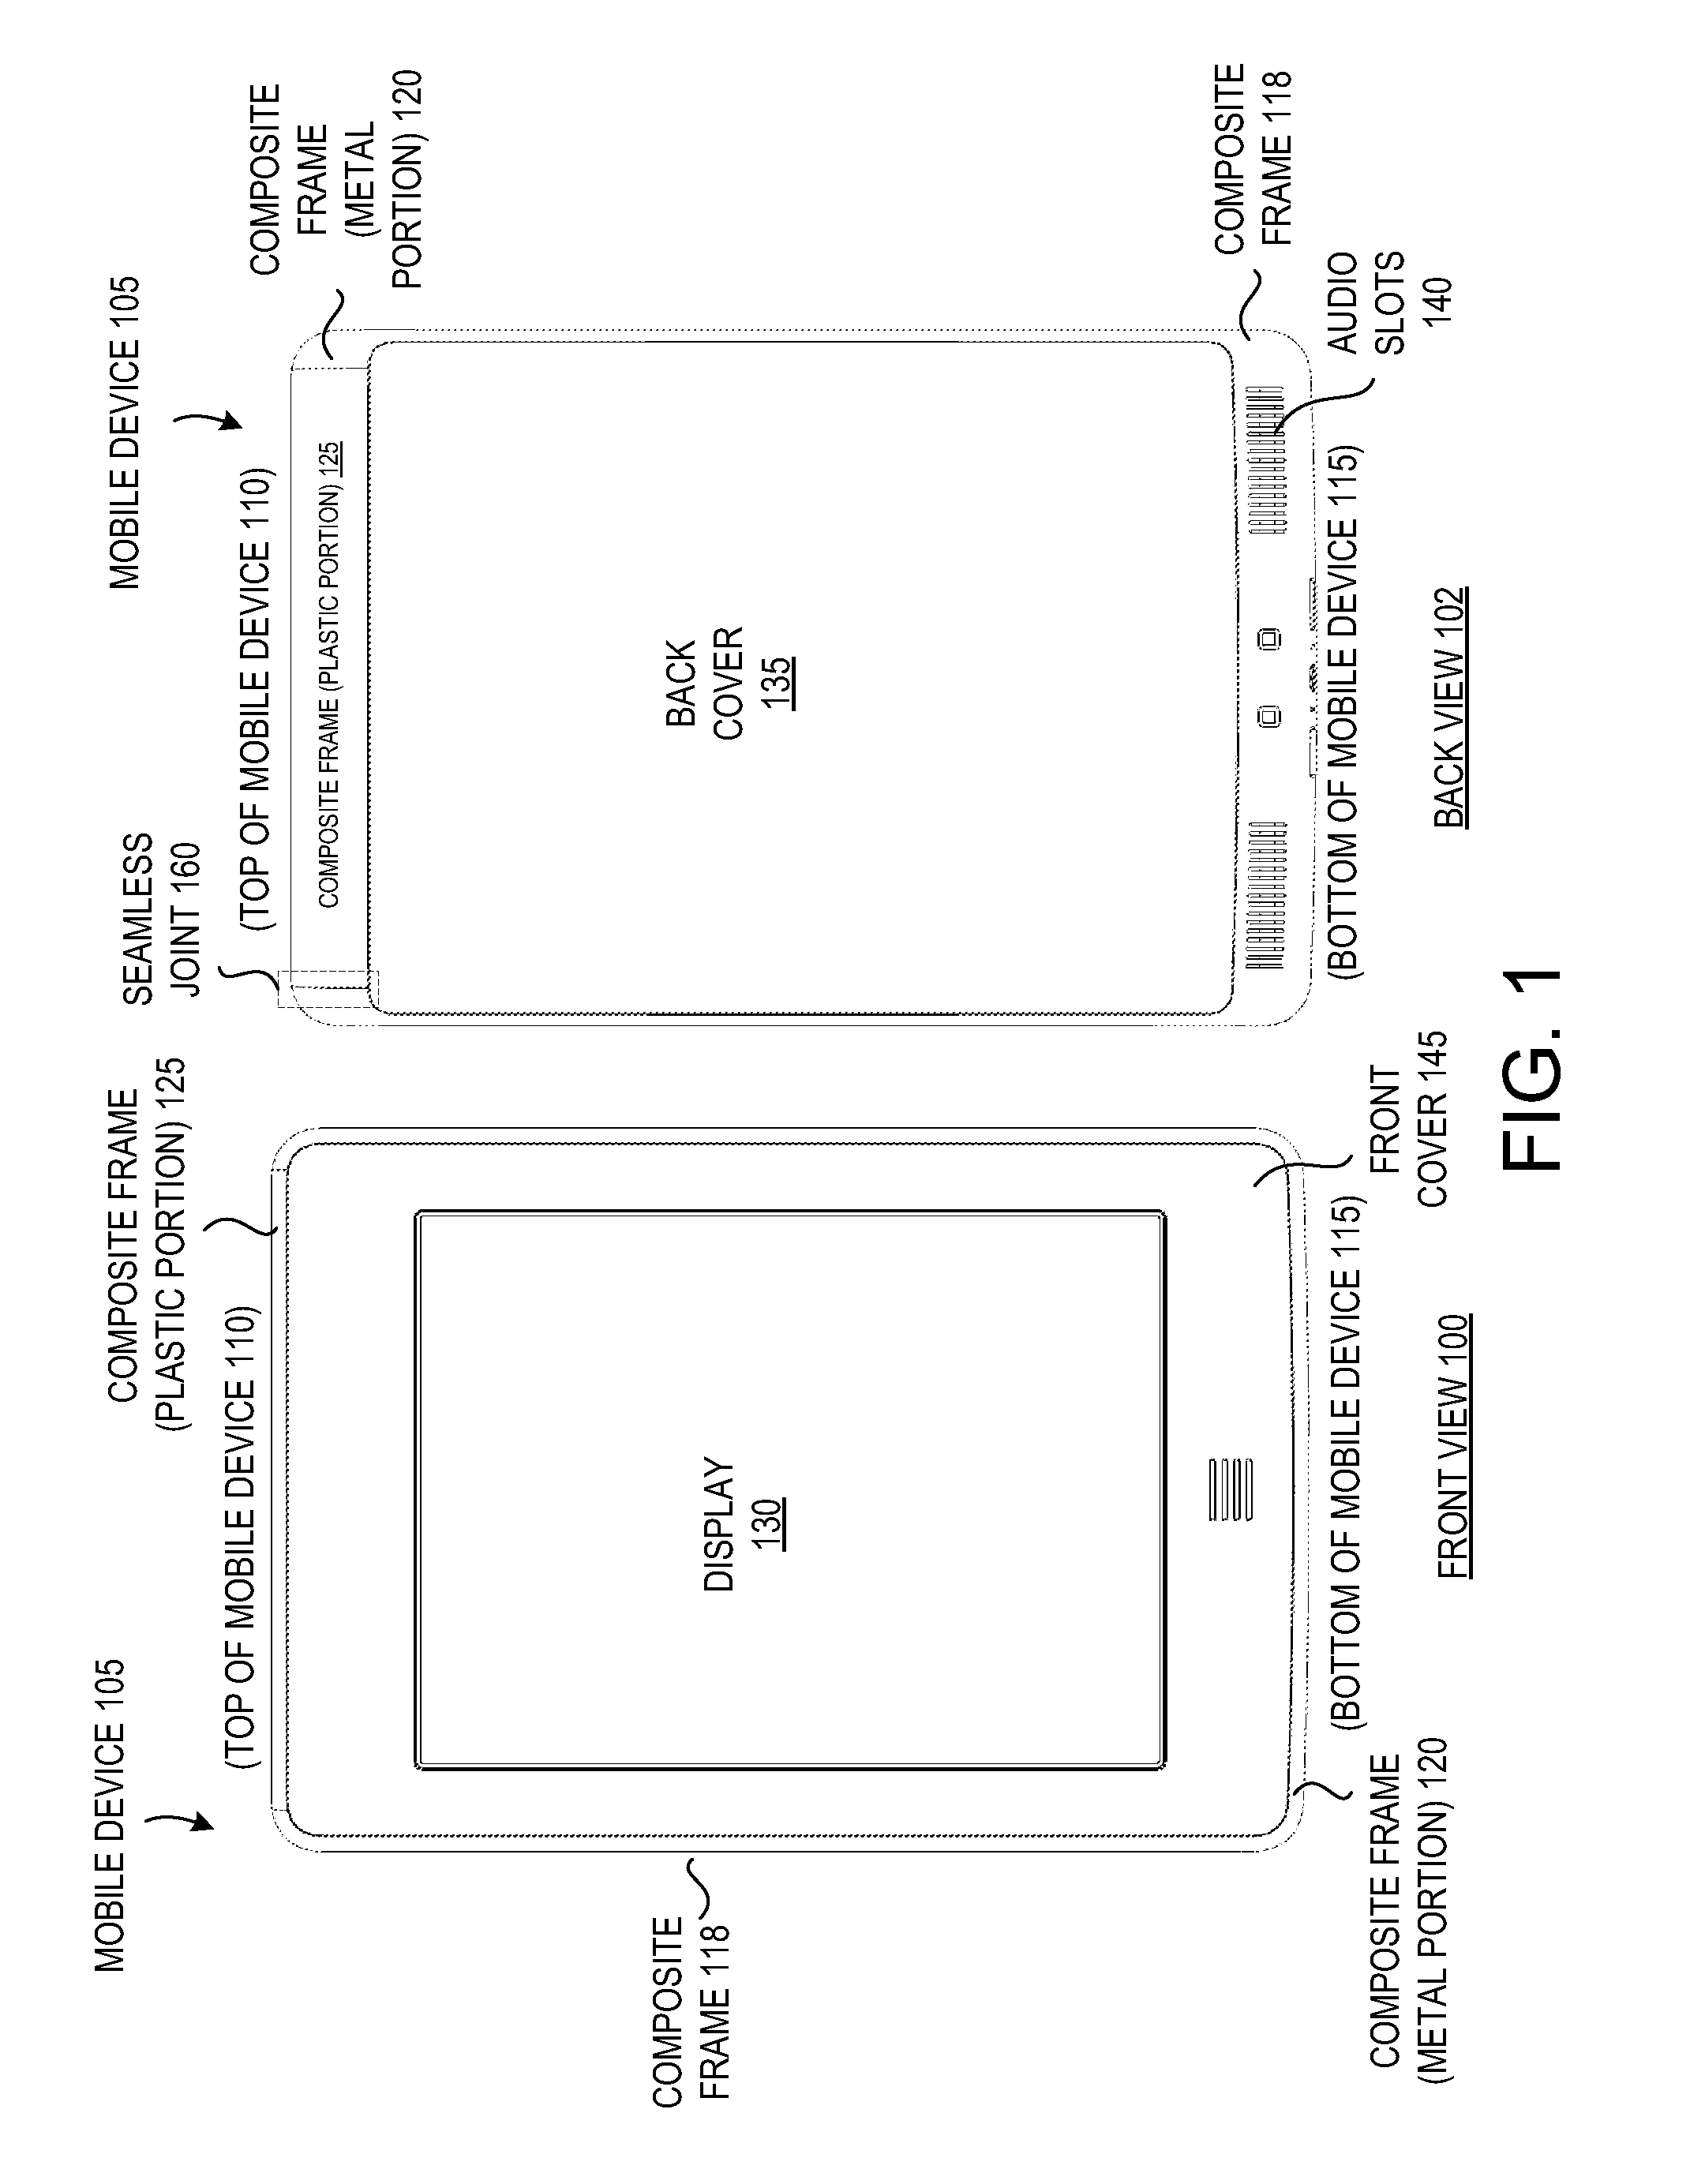 Device frame having mechanically bonded metal and plastic